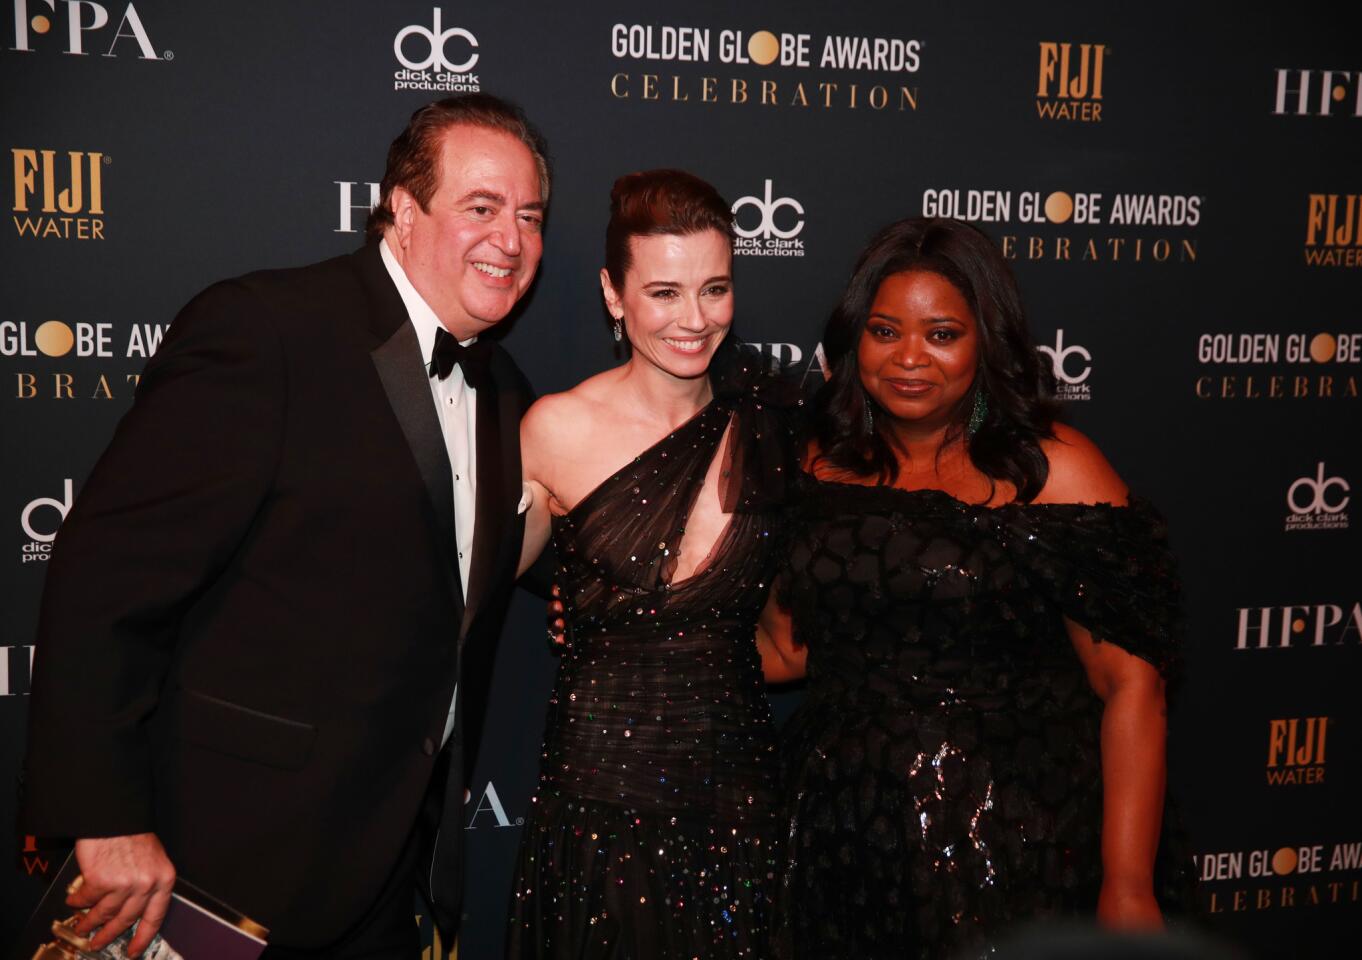 Golden Globe Awards after-party